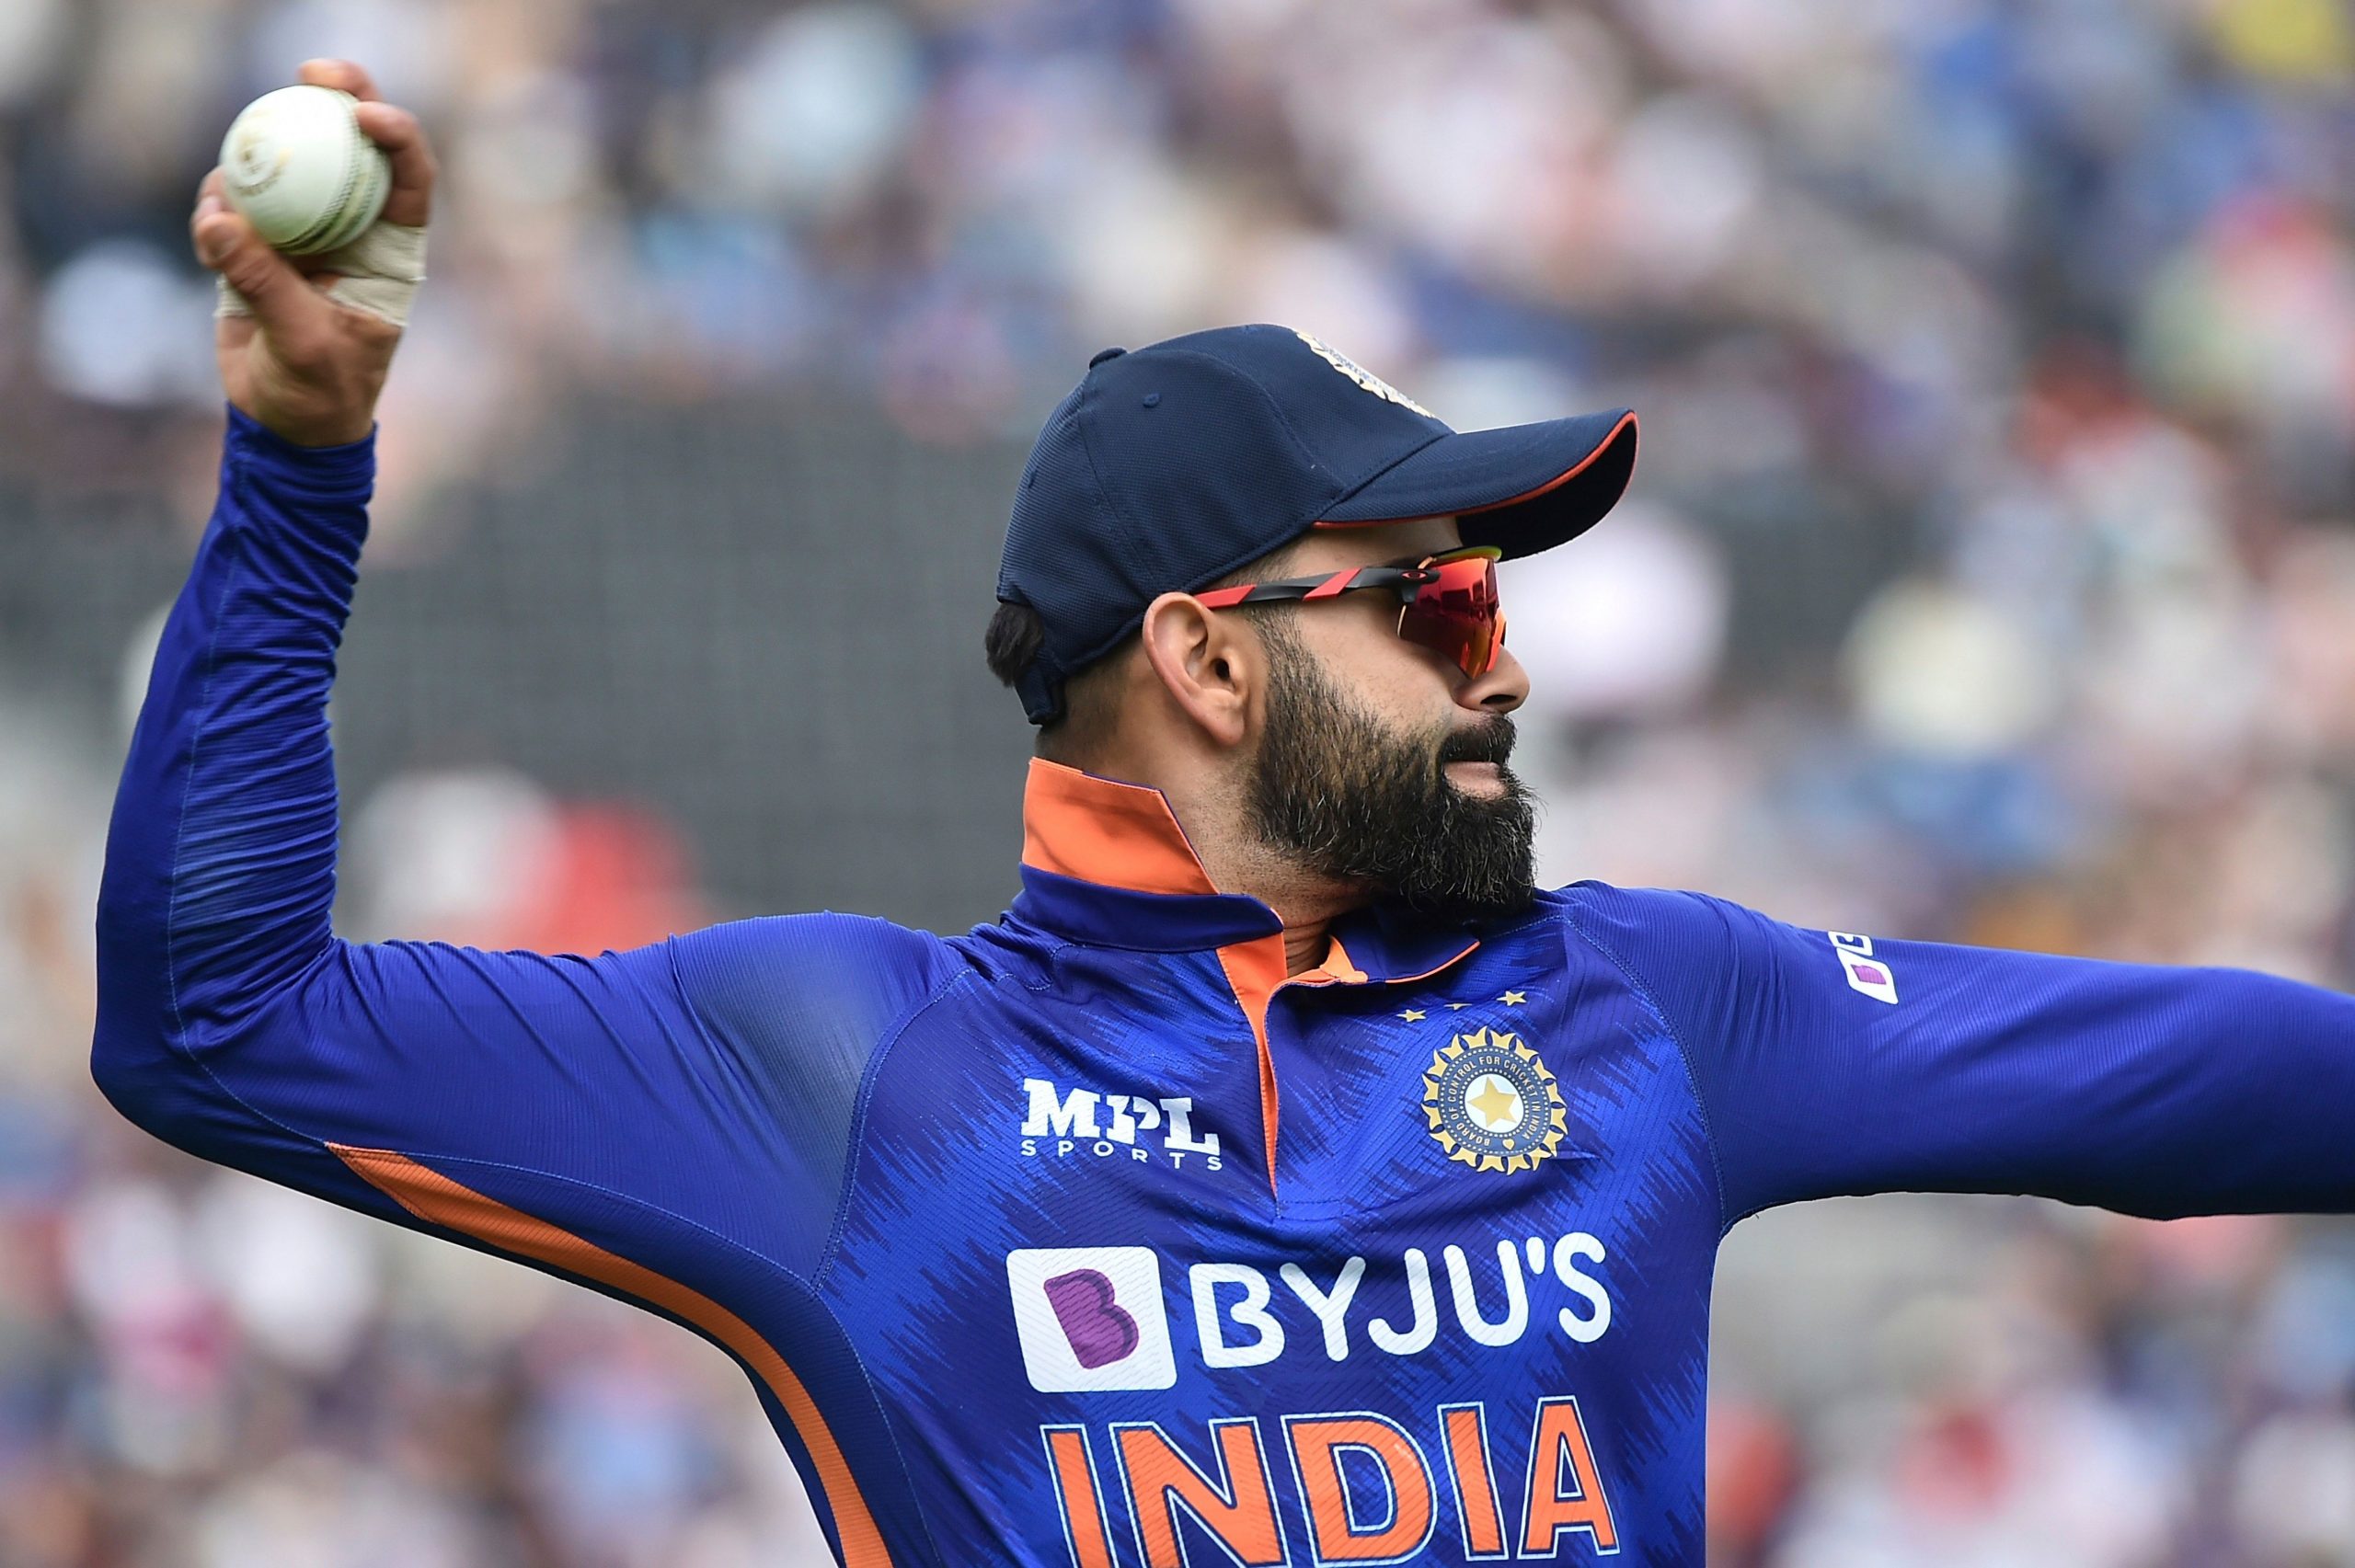 Virat Kohli says he is ‘ready to do anything’ to win 2022 Asia Cup and T20 World Cup